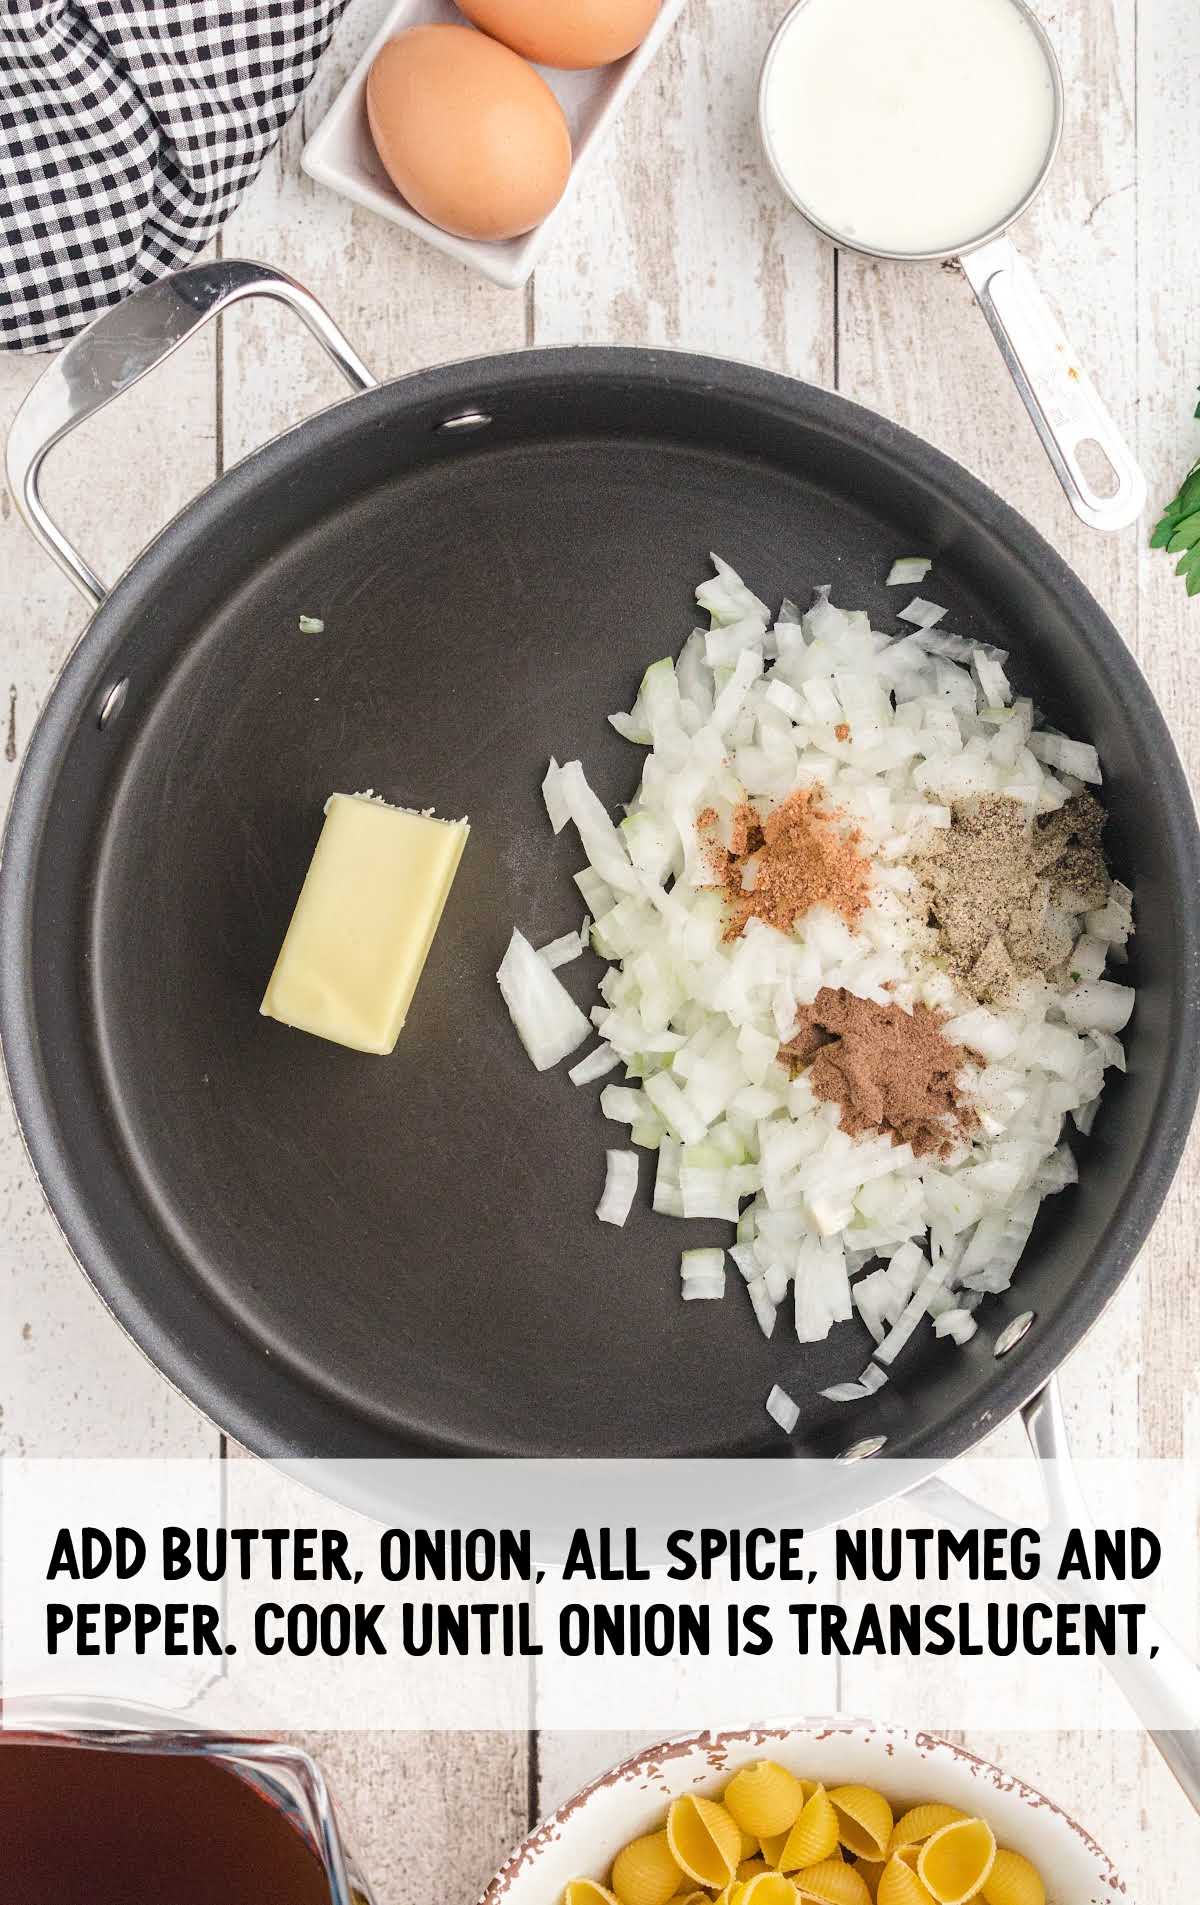 butter, onion, allspice, nutmeg, and black pepper added to a skillet